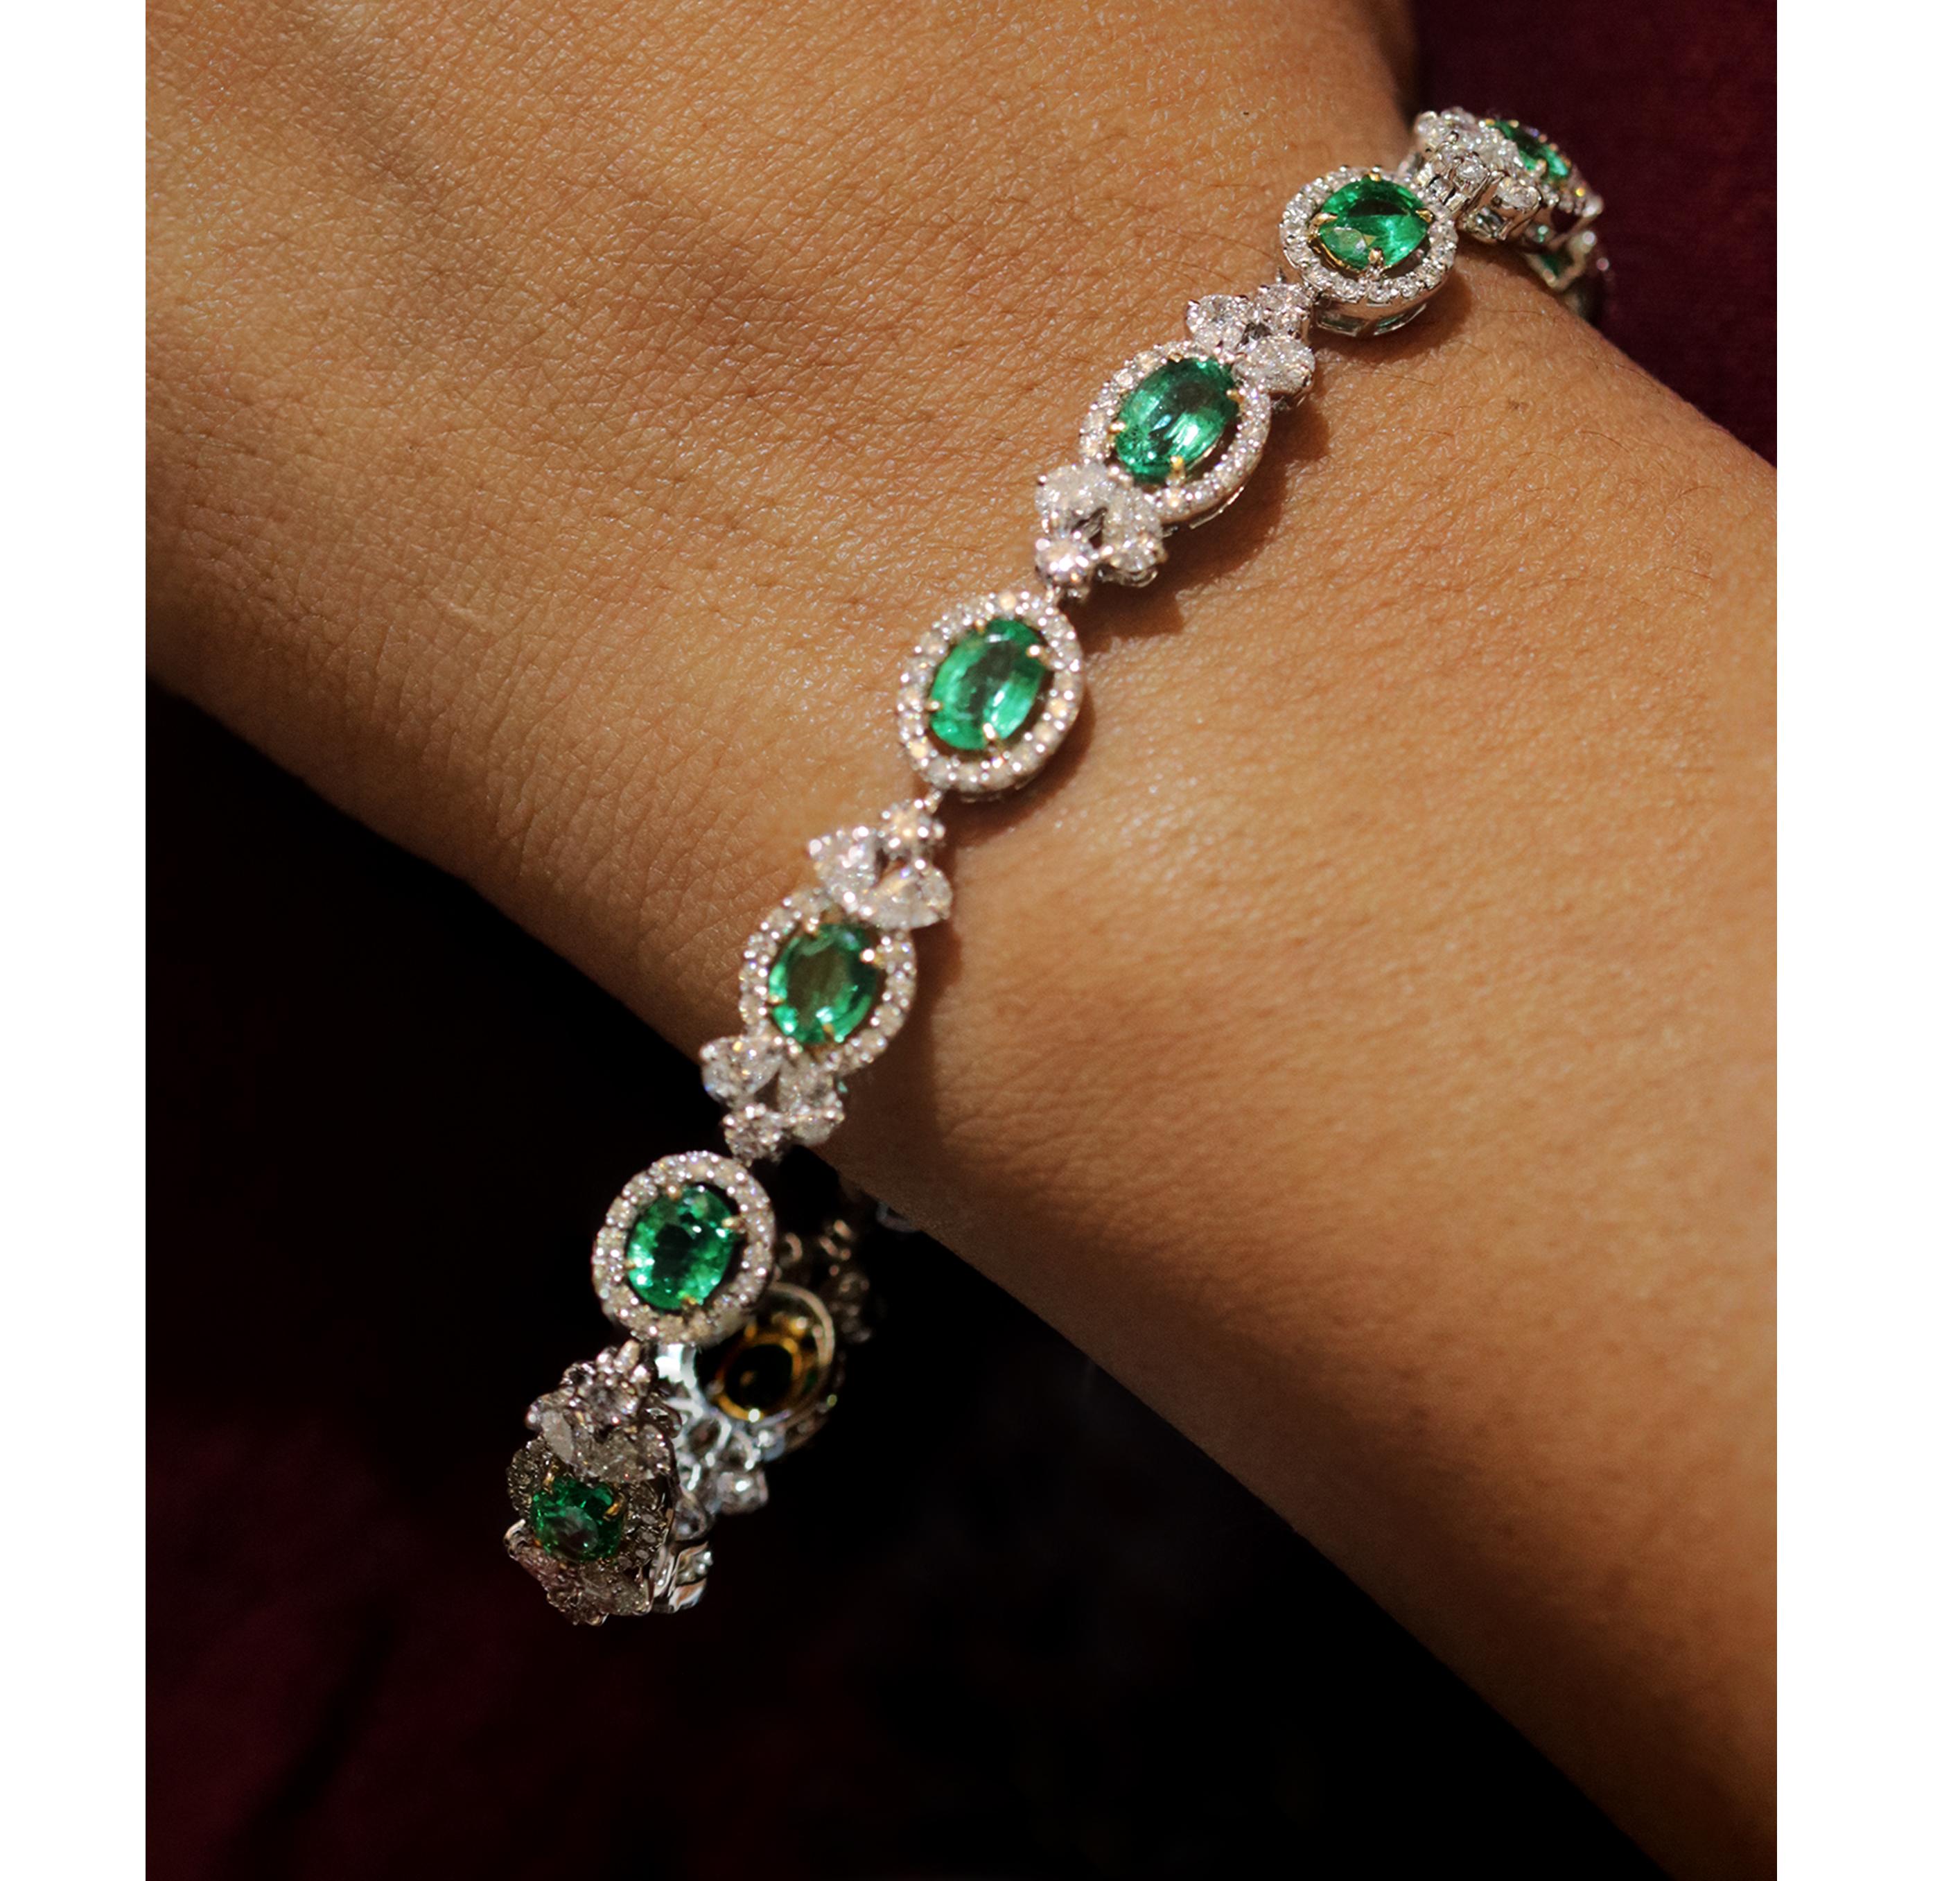 Gross Weight: 16.04 Grams
Diamond Weight: 3.79 cts
Emerald Weight: 4.49 cts
IGI Certificate: 31J857311811

Video of the product can be shared on request.

A darling bracelet crafted using 18K white gold and studded with pear and round brilliant cut